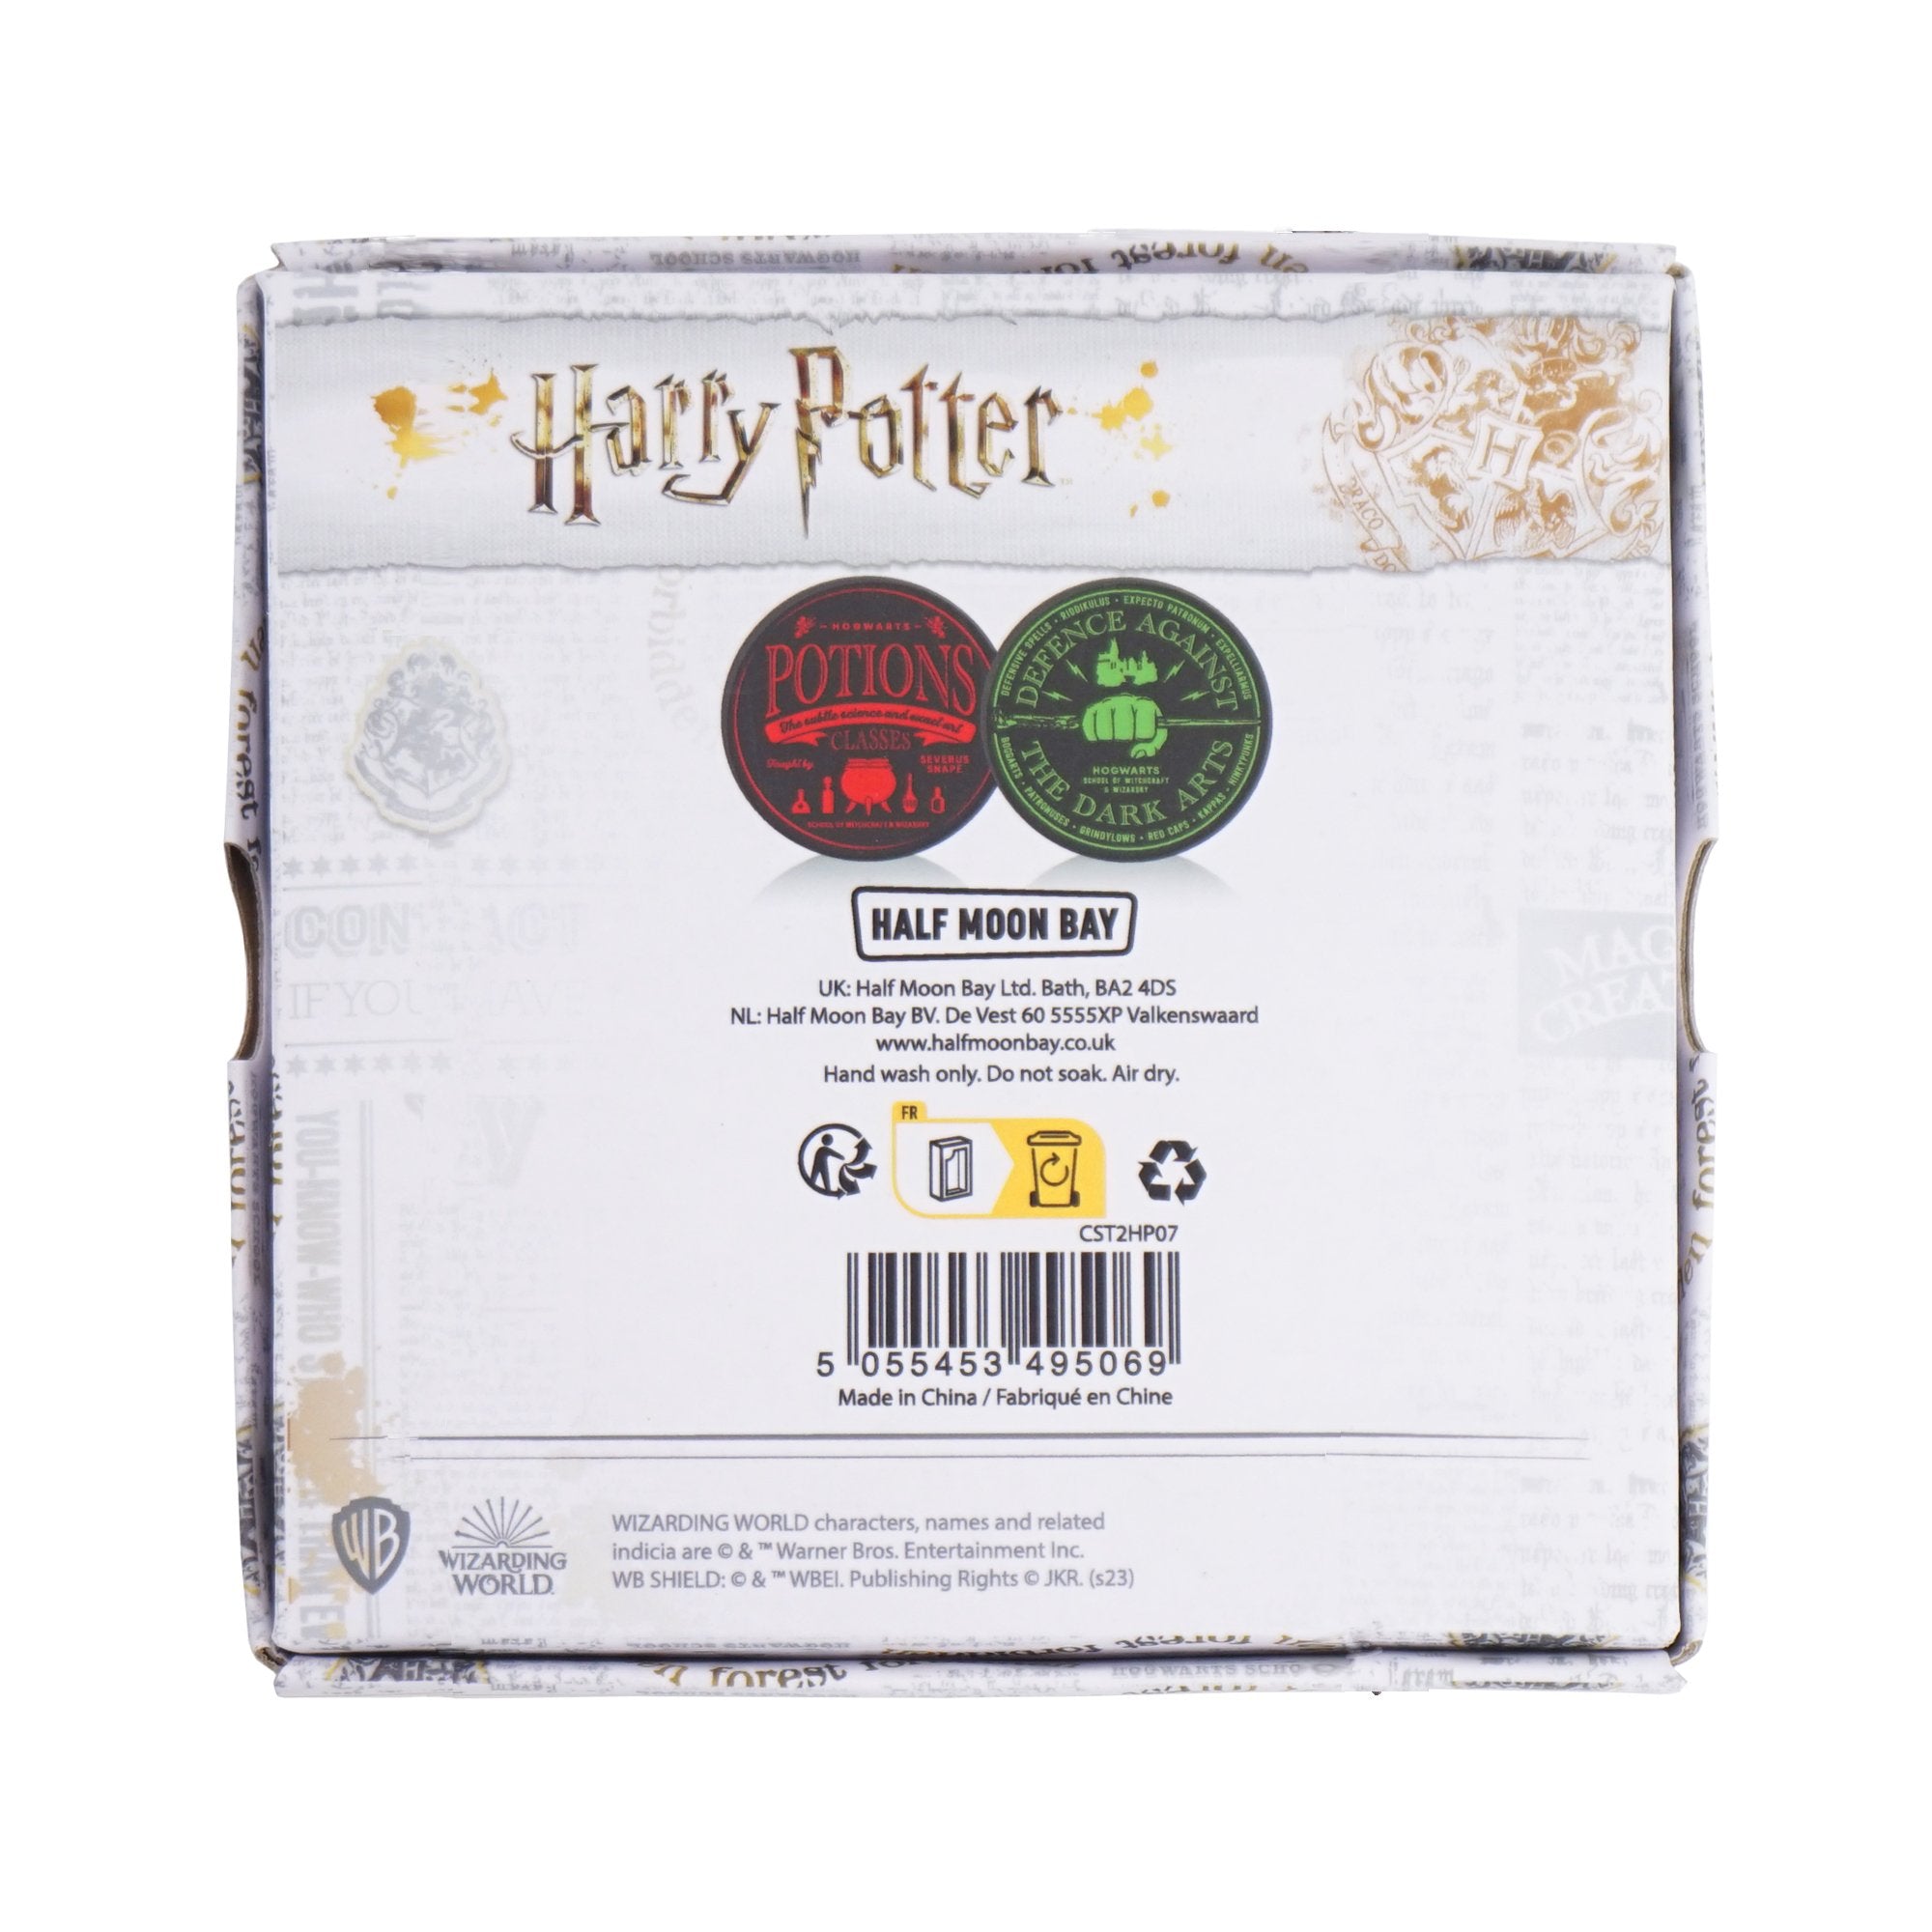 Coasters Set of 2 Ceramic Boxed - Harry Potter (Potions)